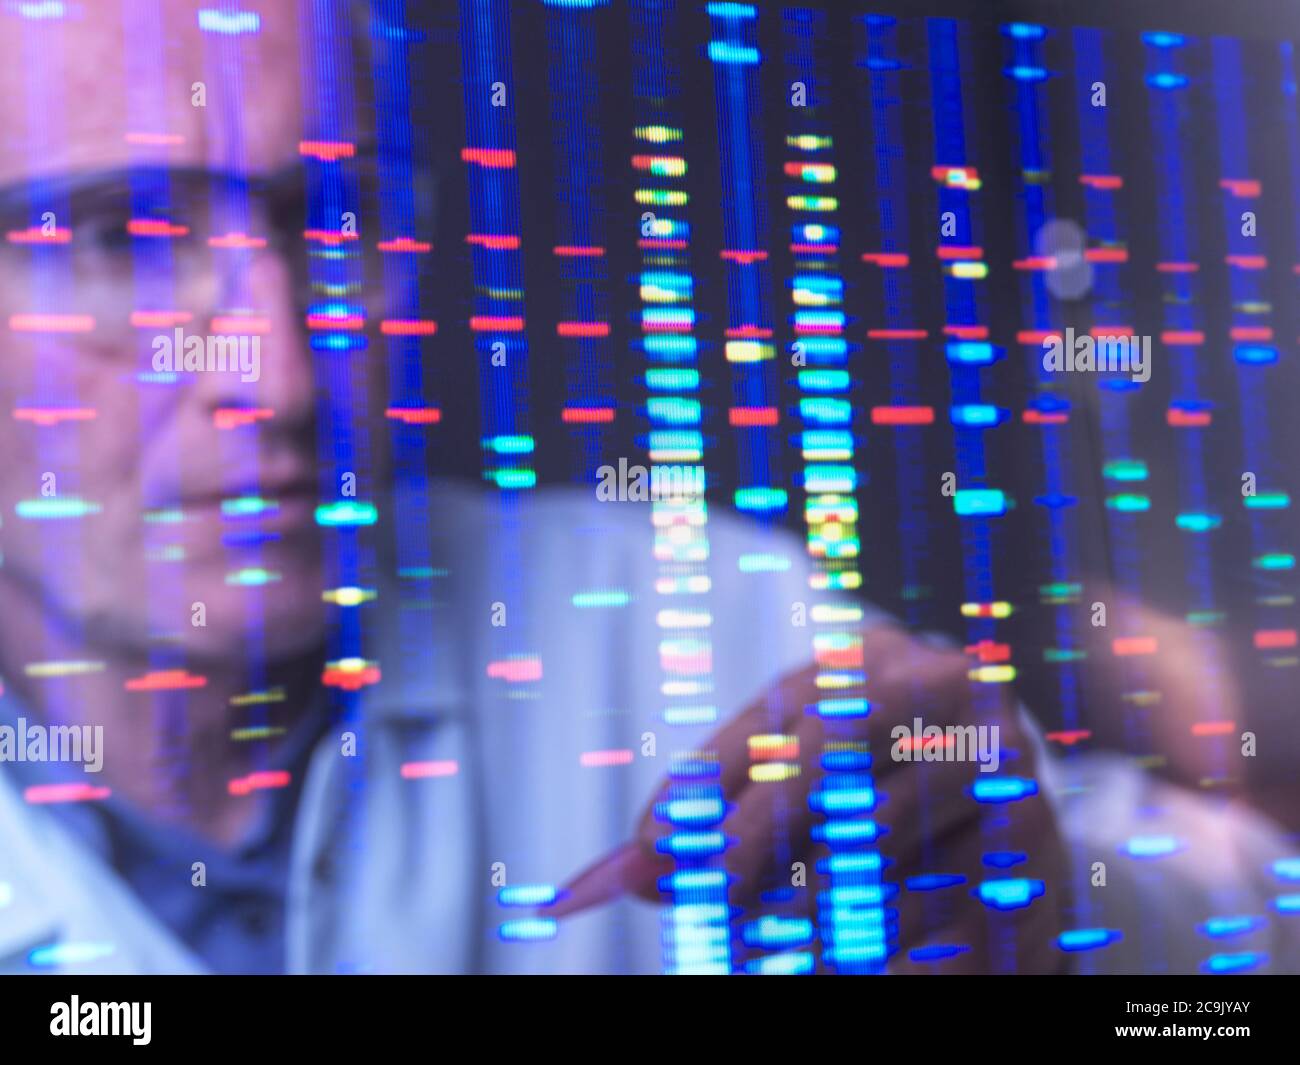 Scientist viewing DNA (deoxyribonucleic acid) profiles on a computer screen. Stock Photo